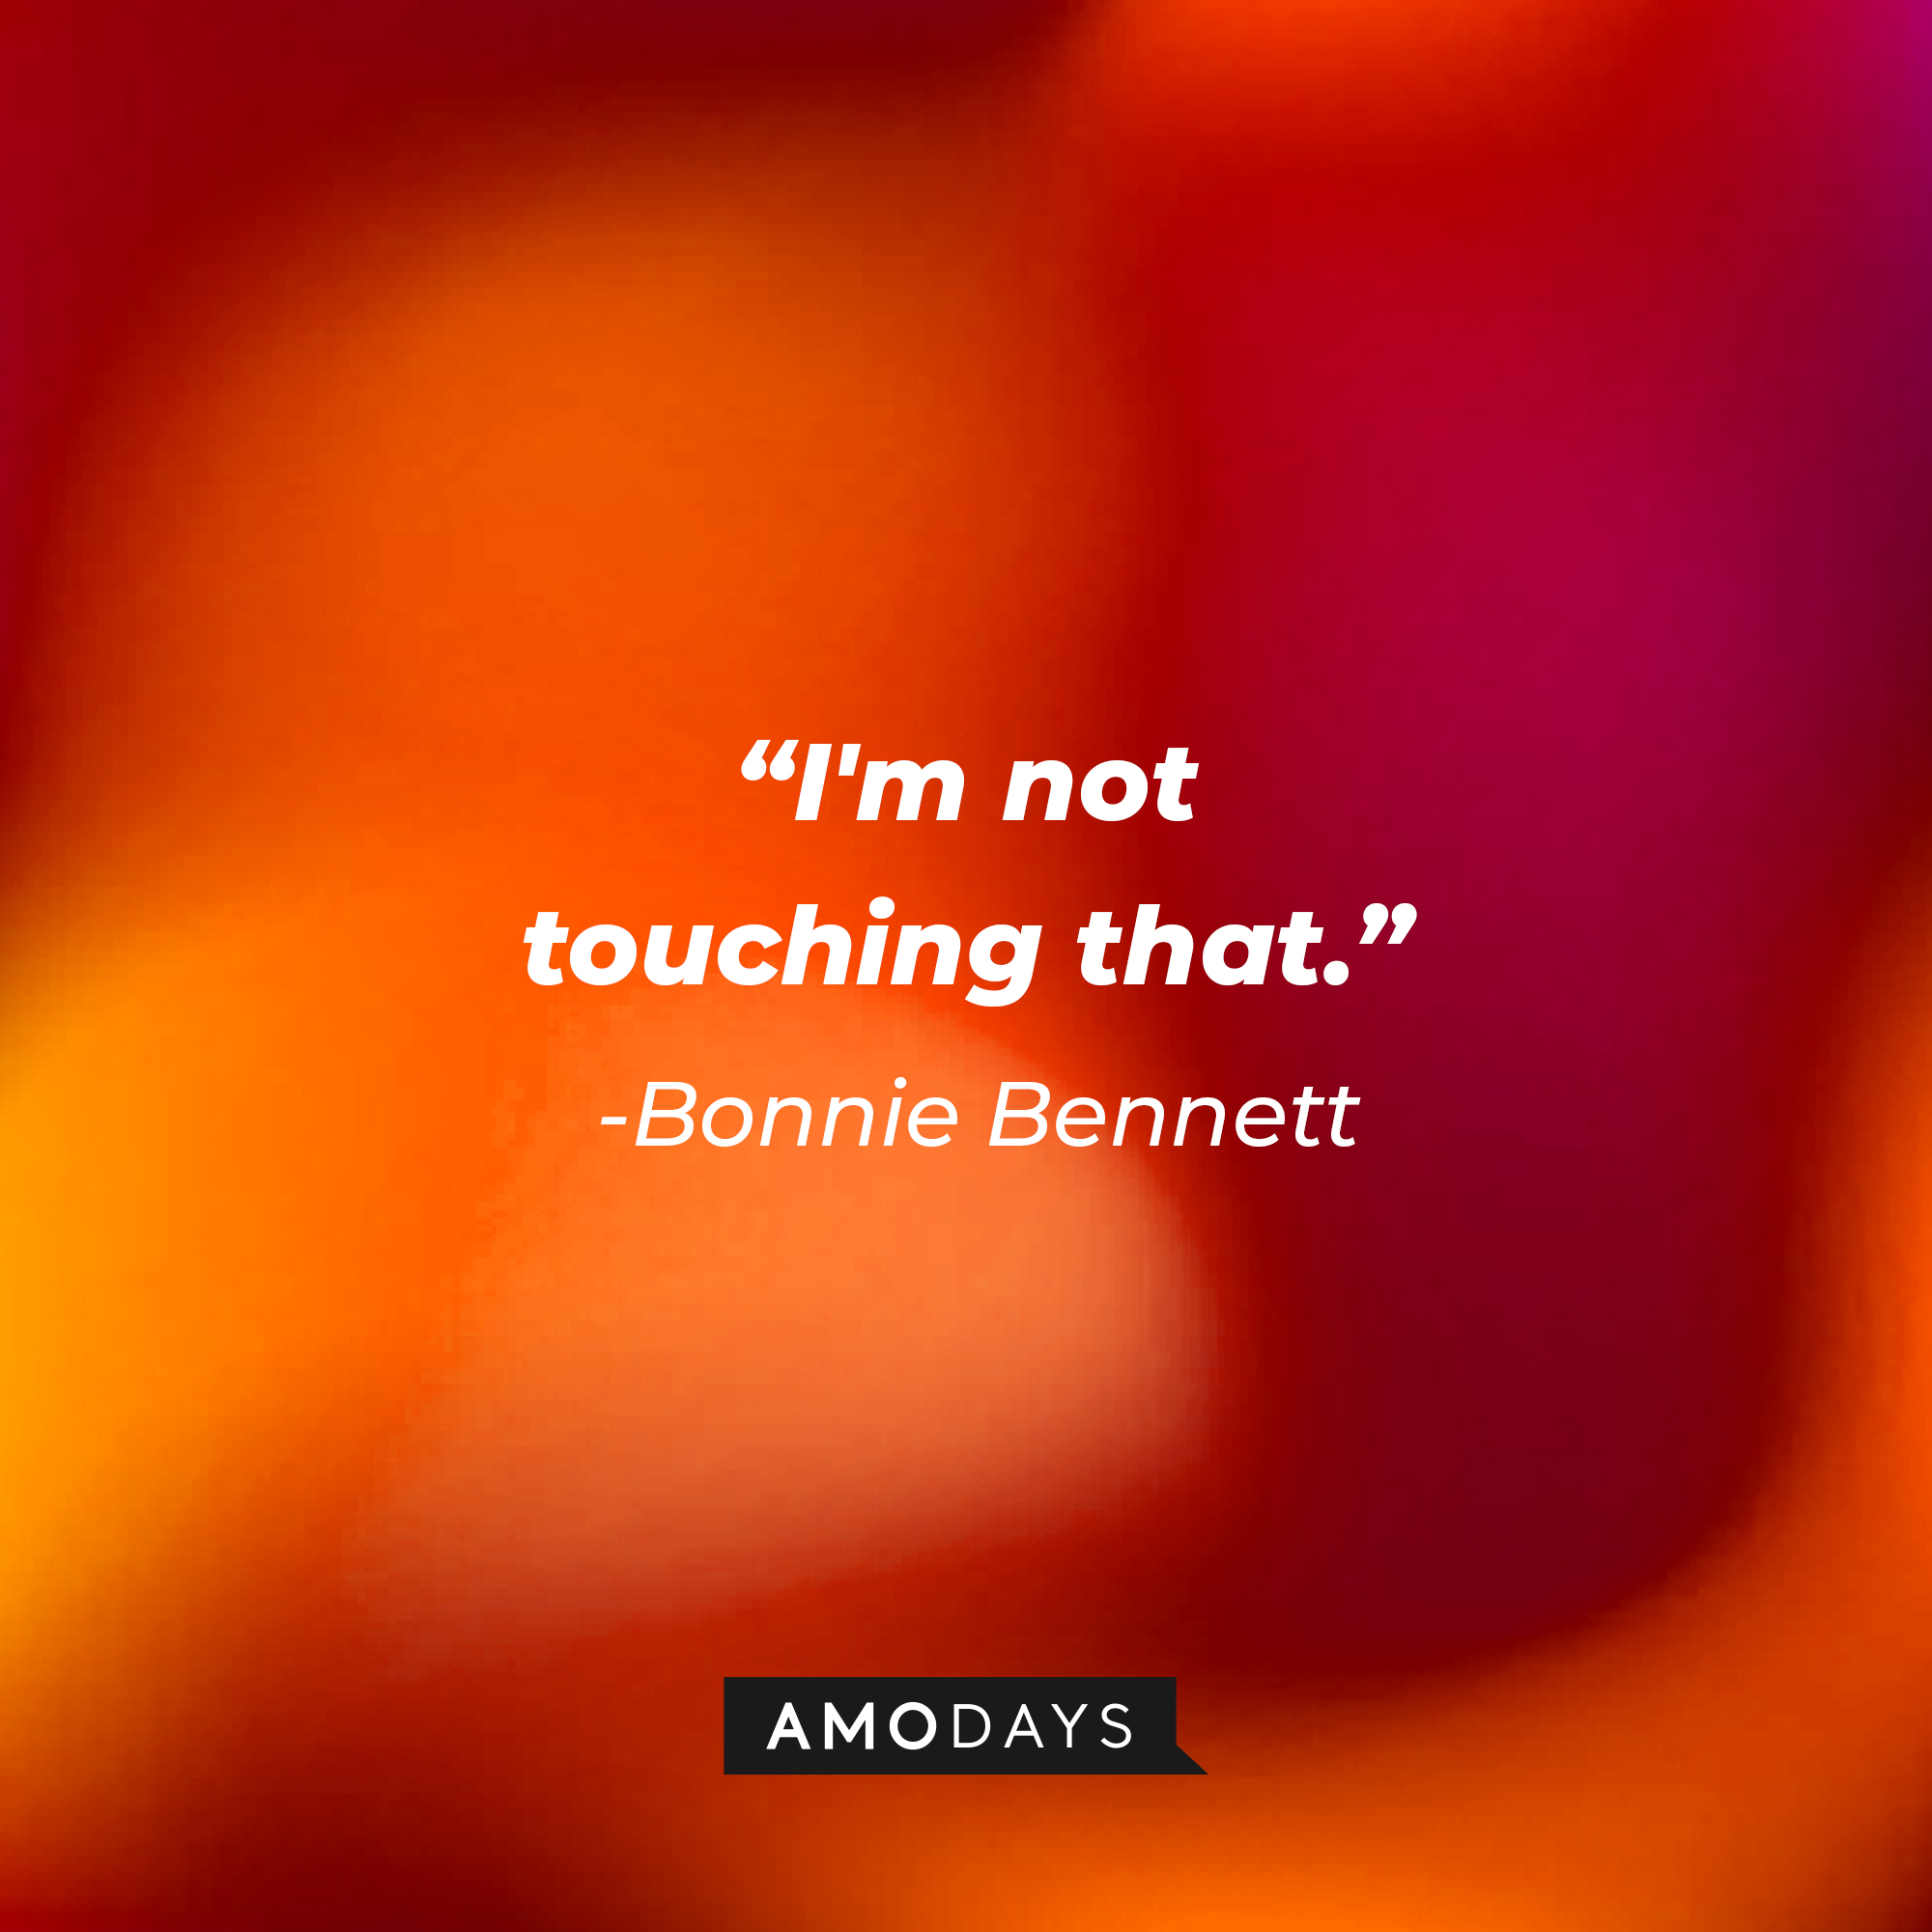 Bonnie Bennett’s quote: “I'm not touching that.”  | Source: AmoDays